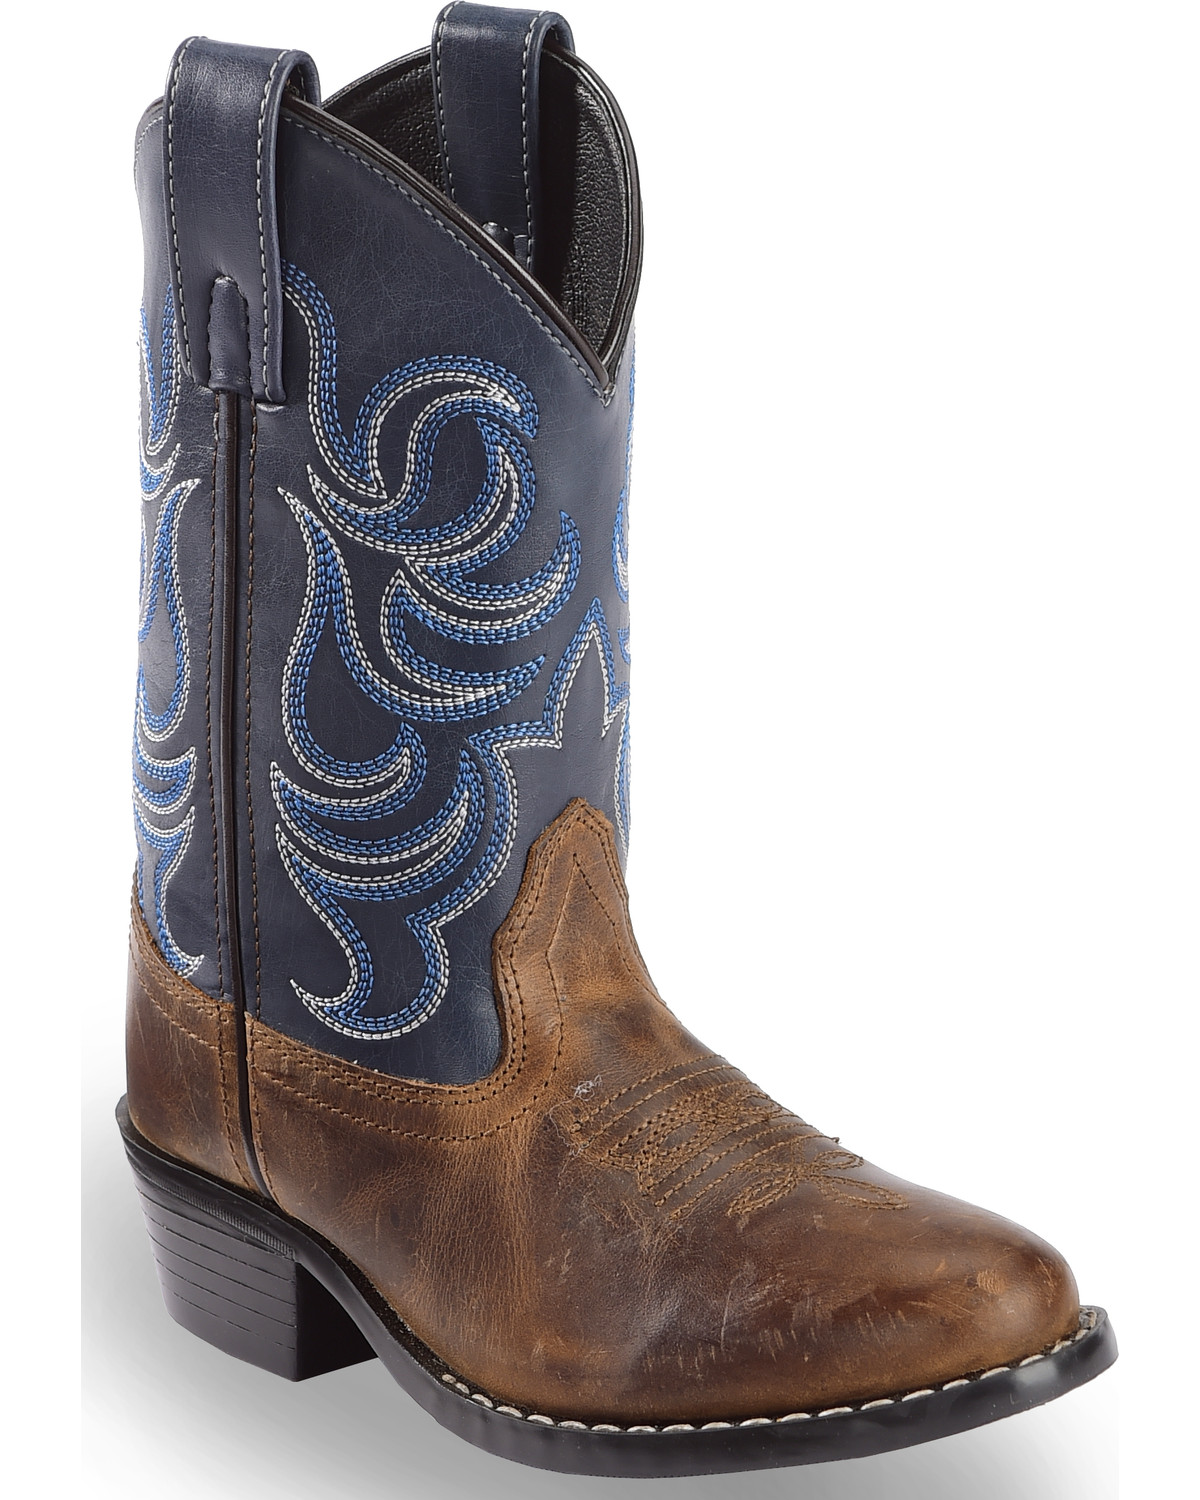 Cody James Boys' Two-Tone Embroidered Western Boots - Round Toe